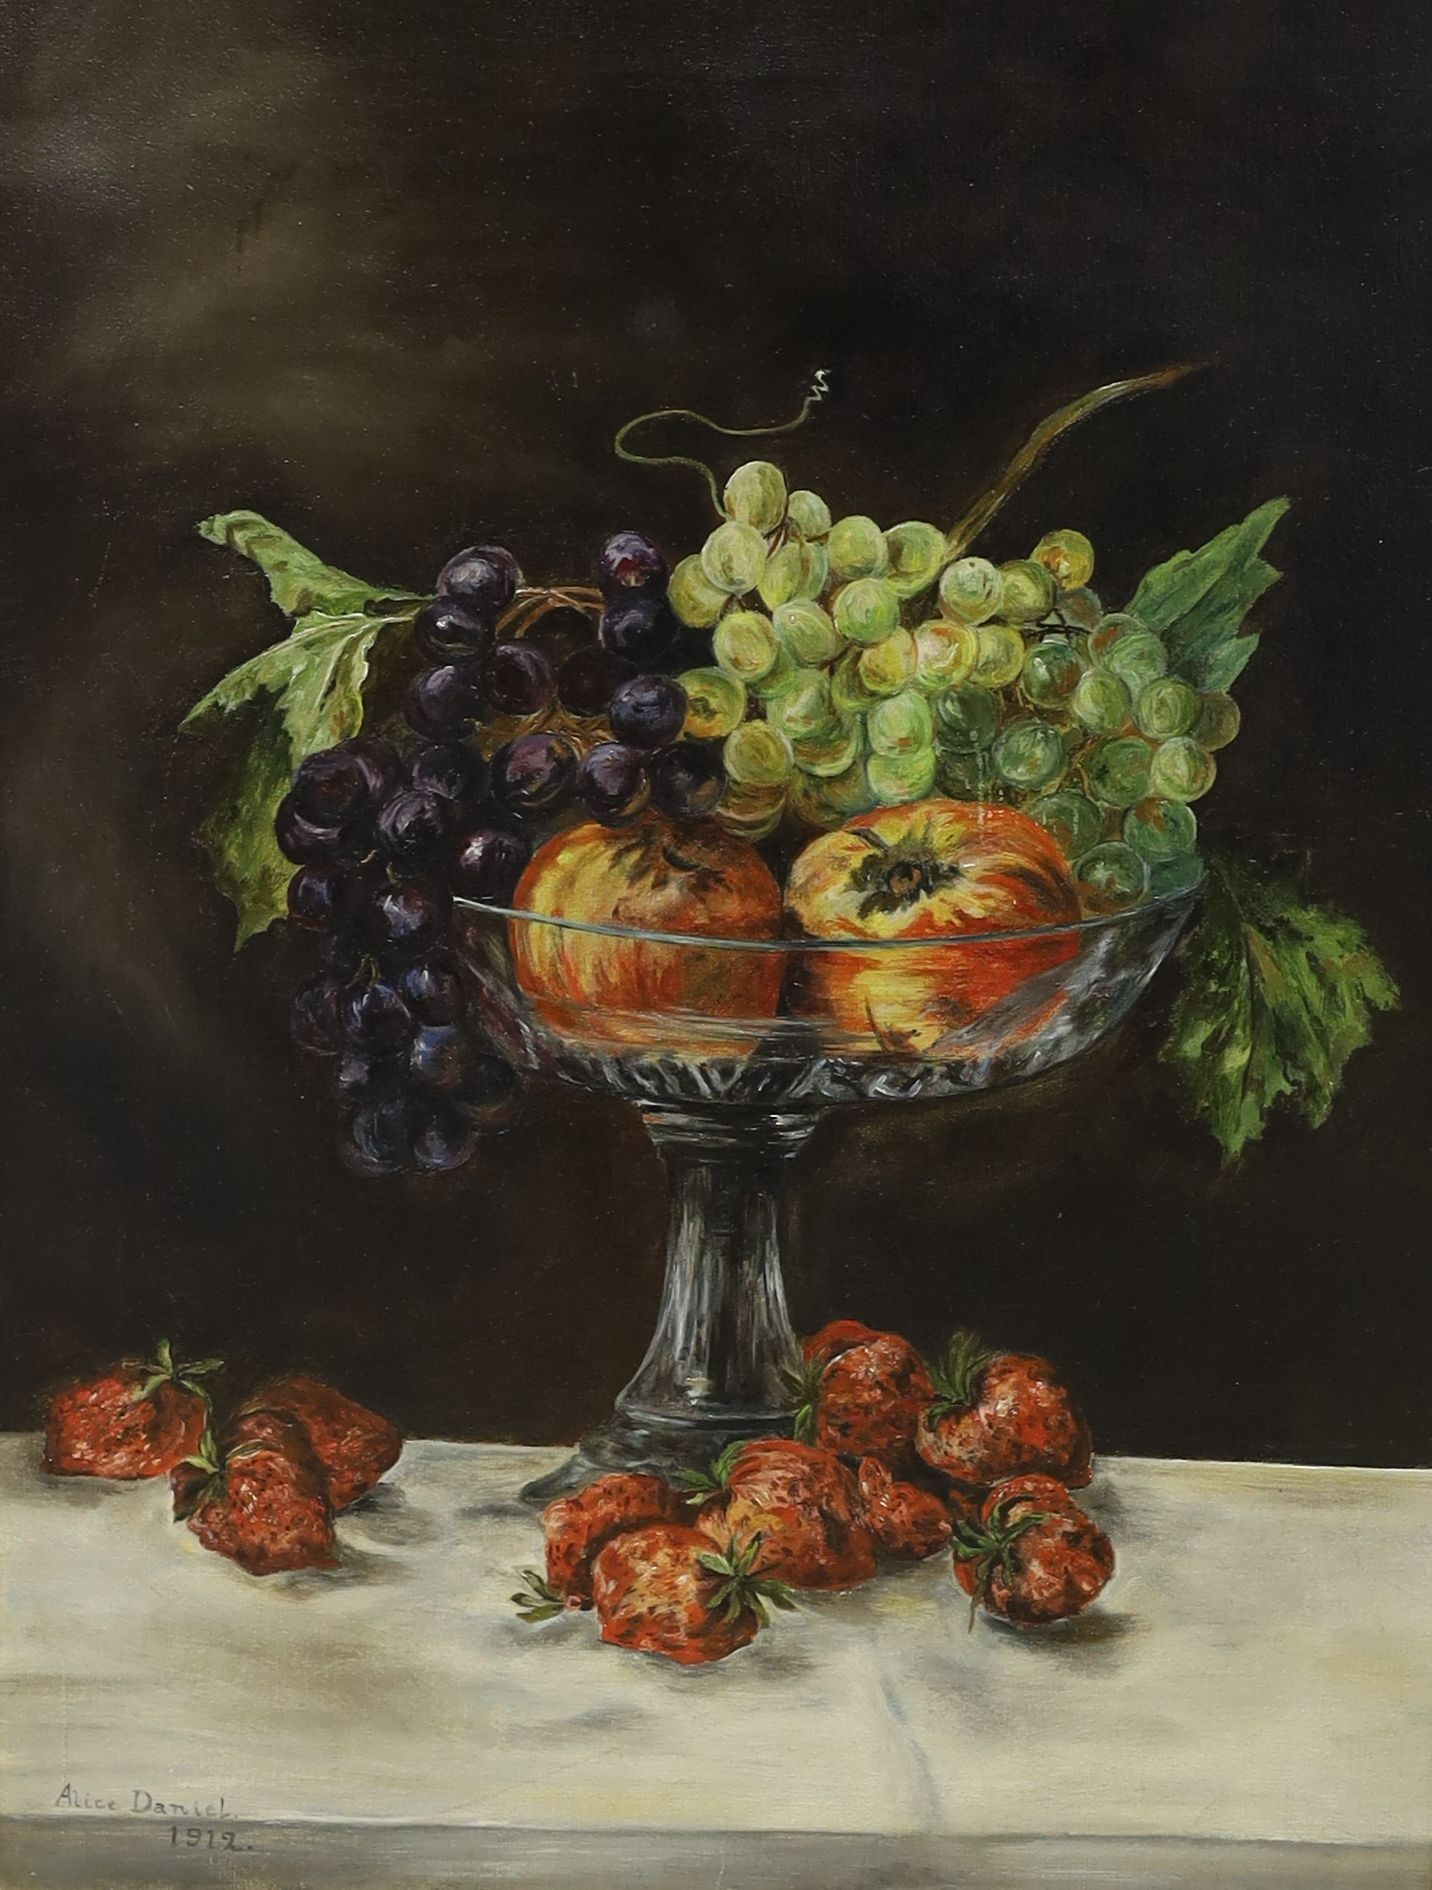 Alice Daniel, pair of oils on canvas, Still lifes of fruit, signed and dated 1912, 60 x 45cm